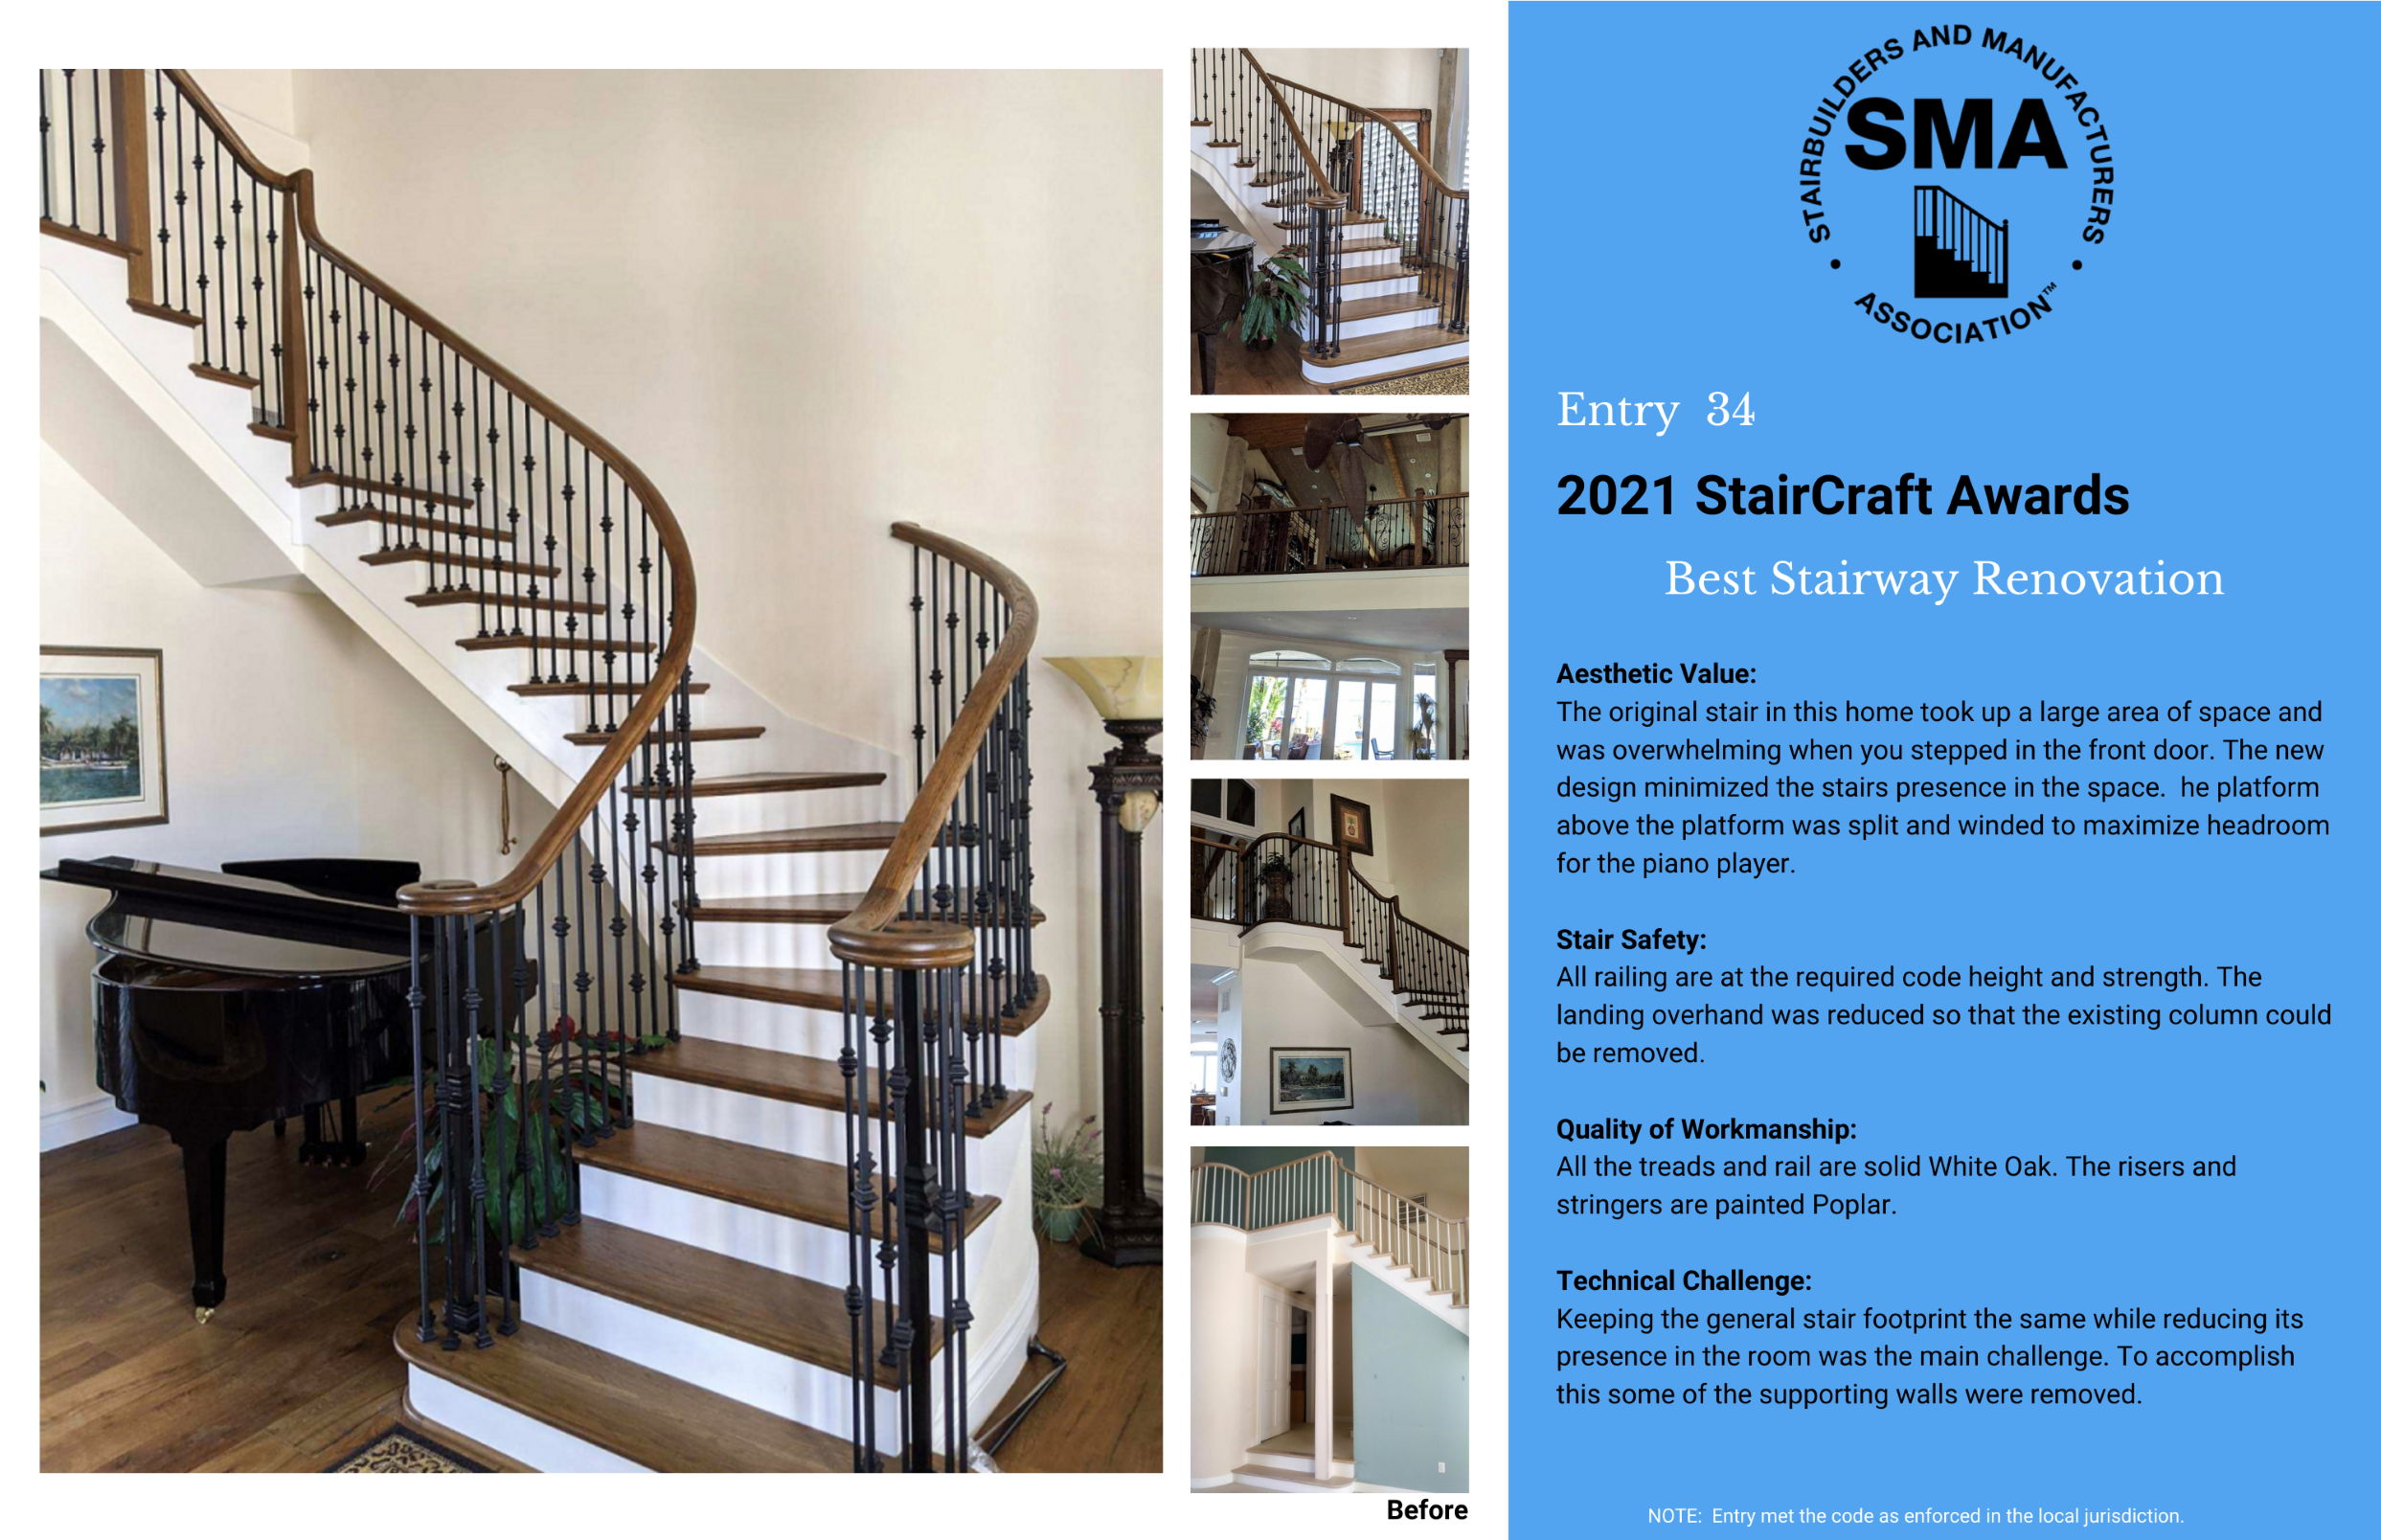 2021 StairCraft Awards Entry 34